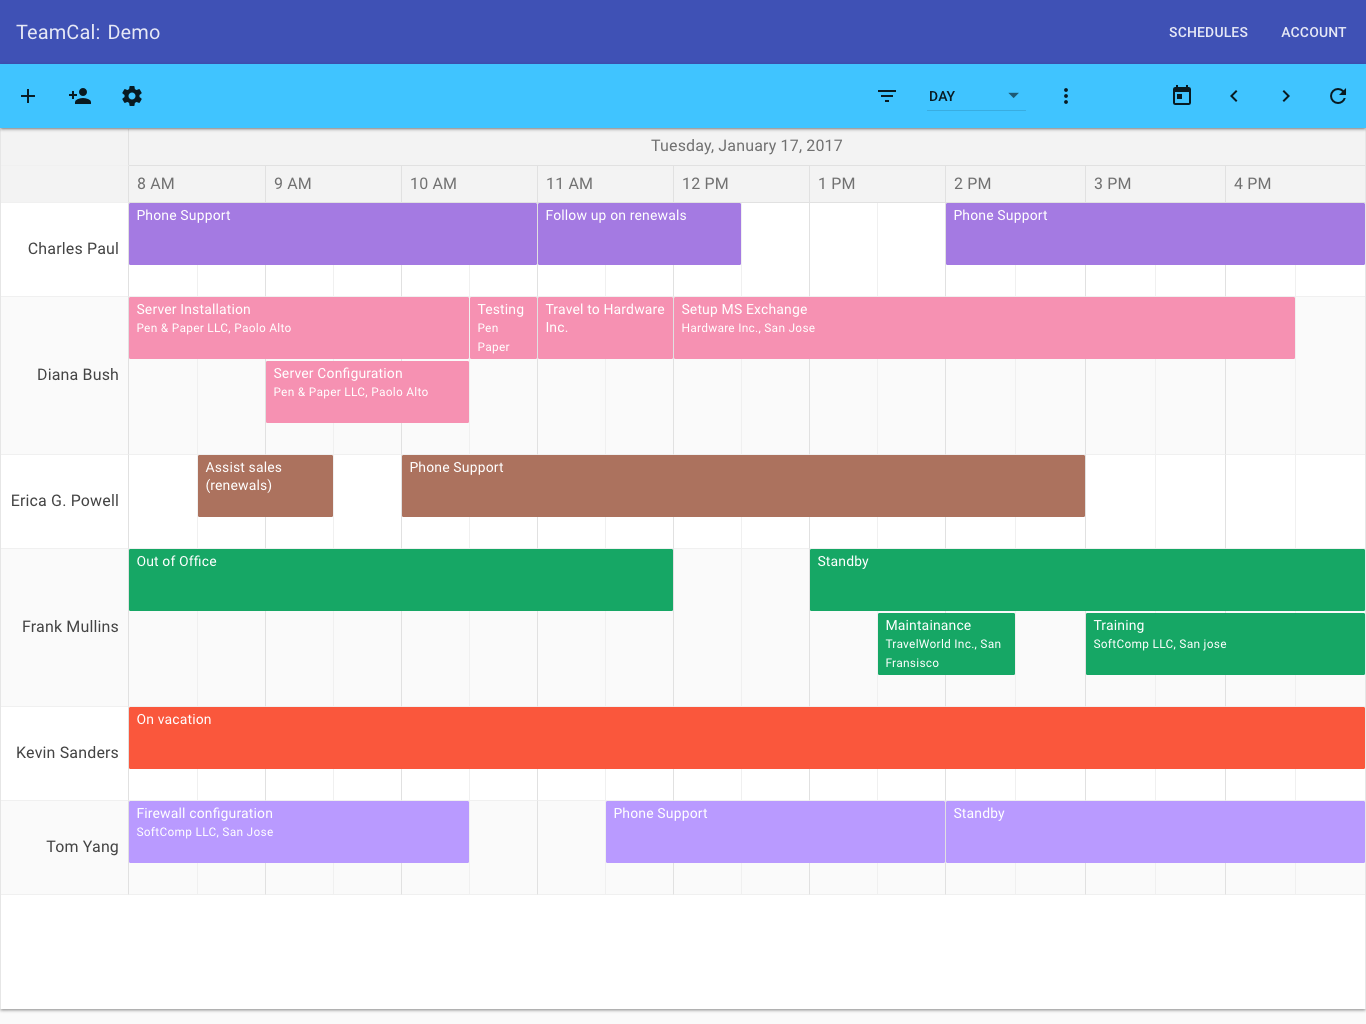 TeamCal's scheduling view